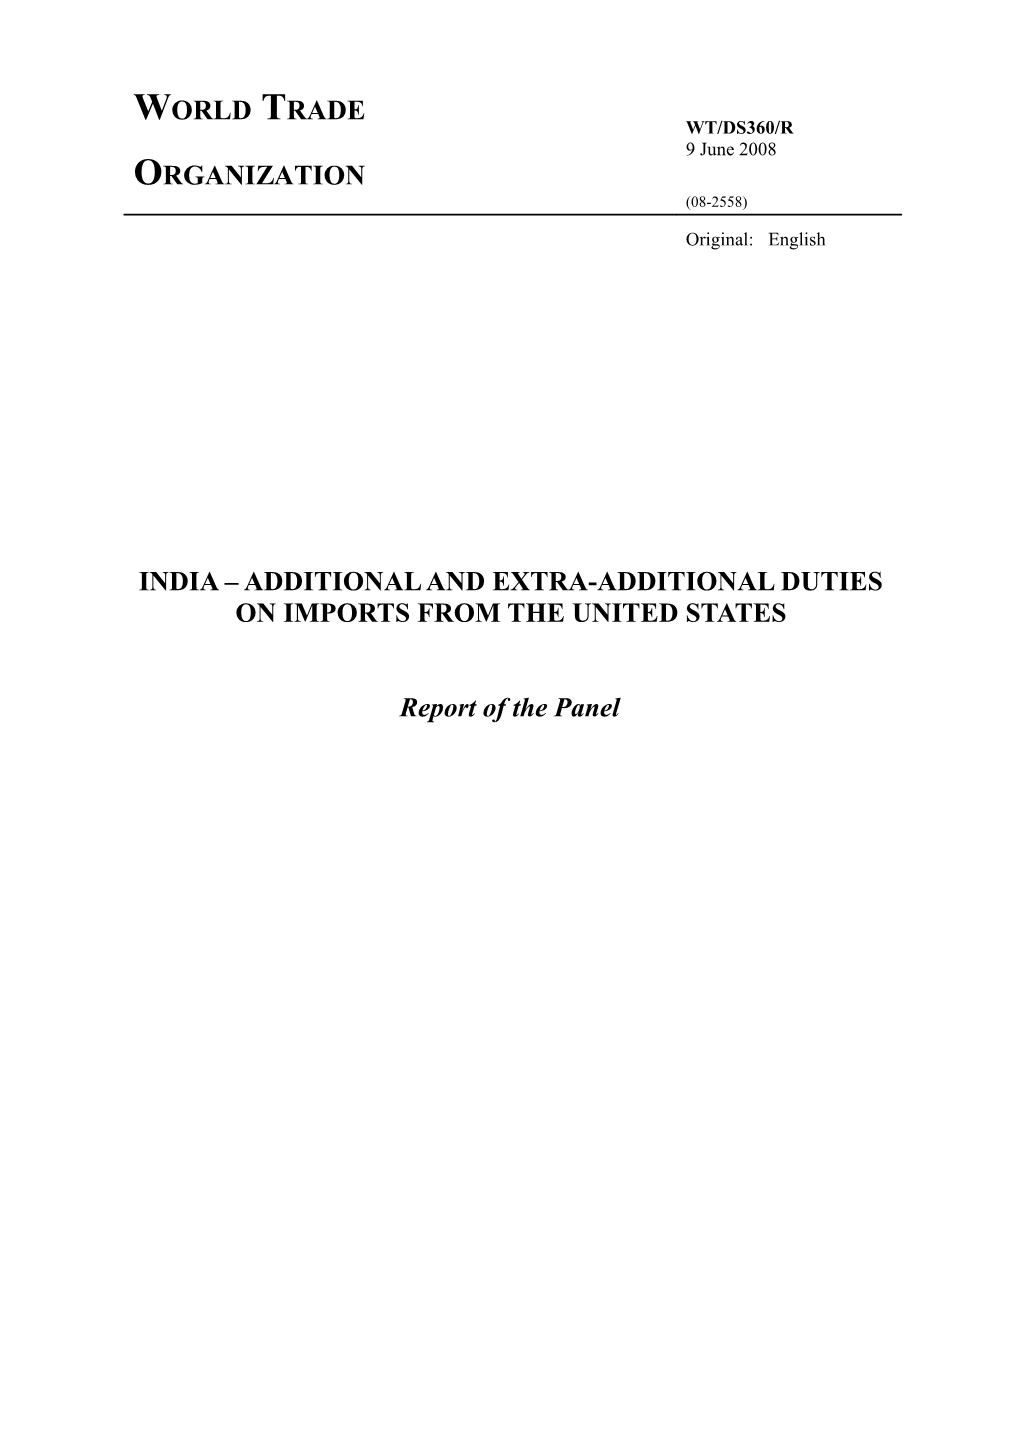 India Additional and Extra-Additional Duties on Imports from the United States